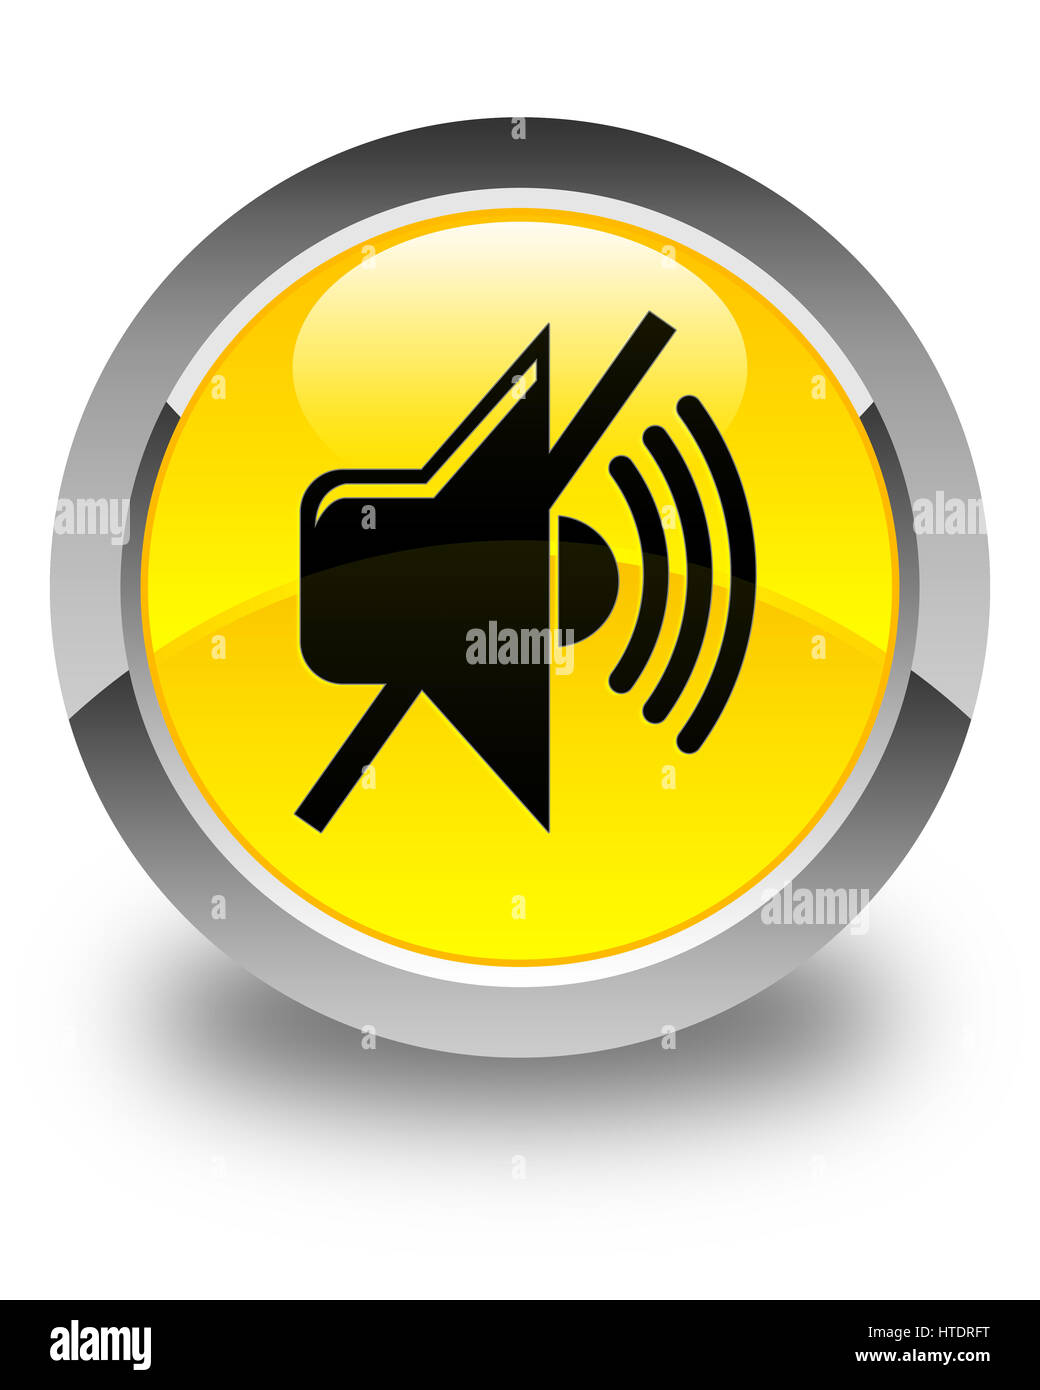 Mute volume icon isolated on glossy yellow round button abstract illustration Stock Photo